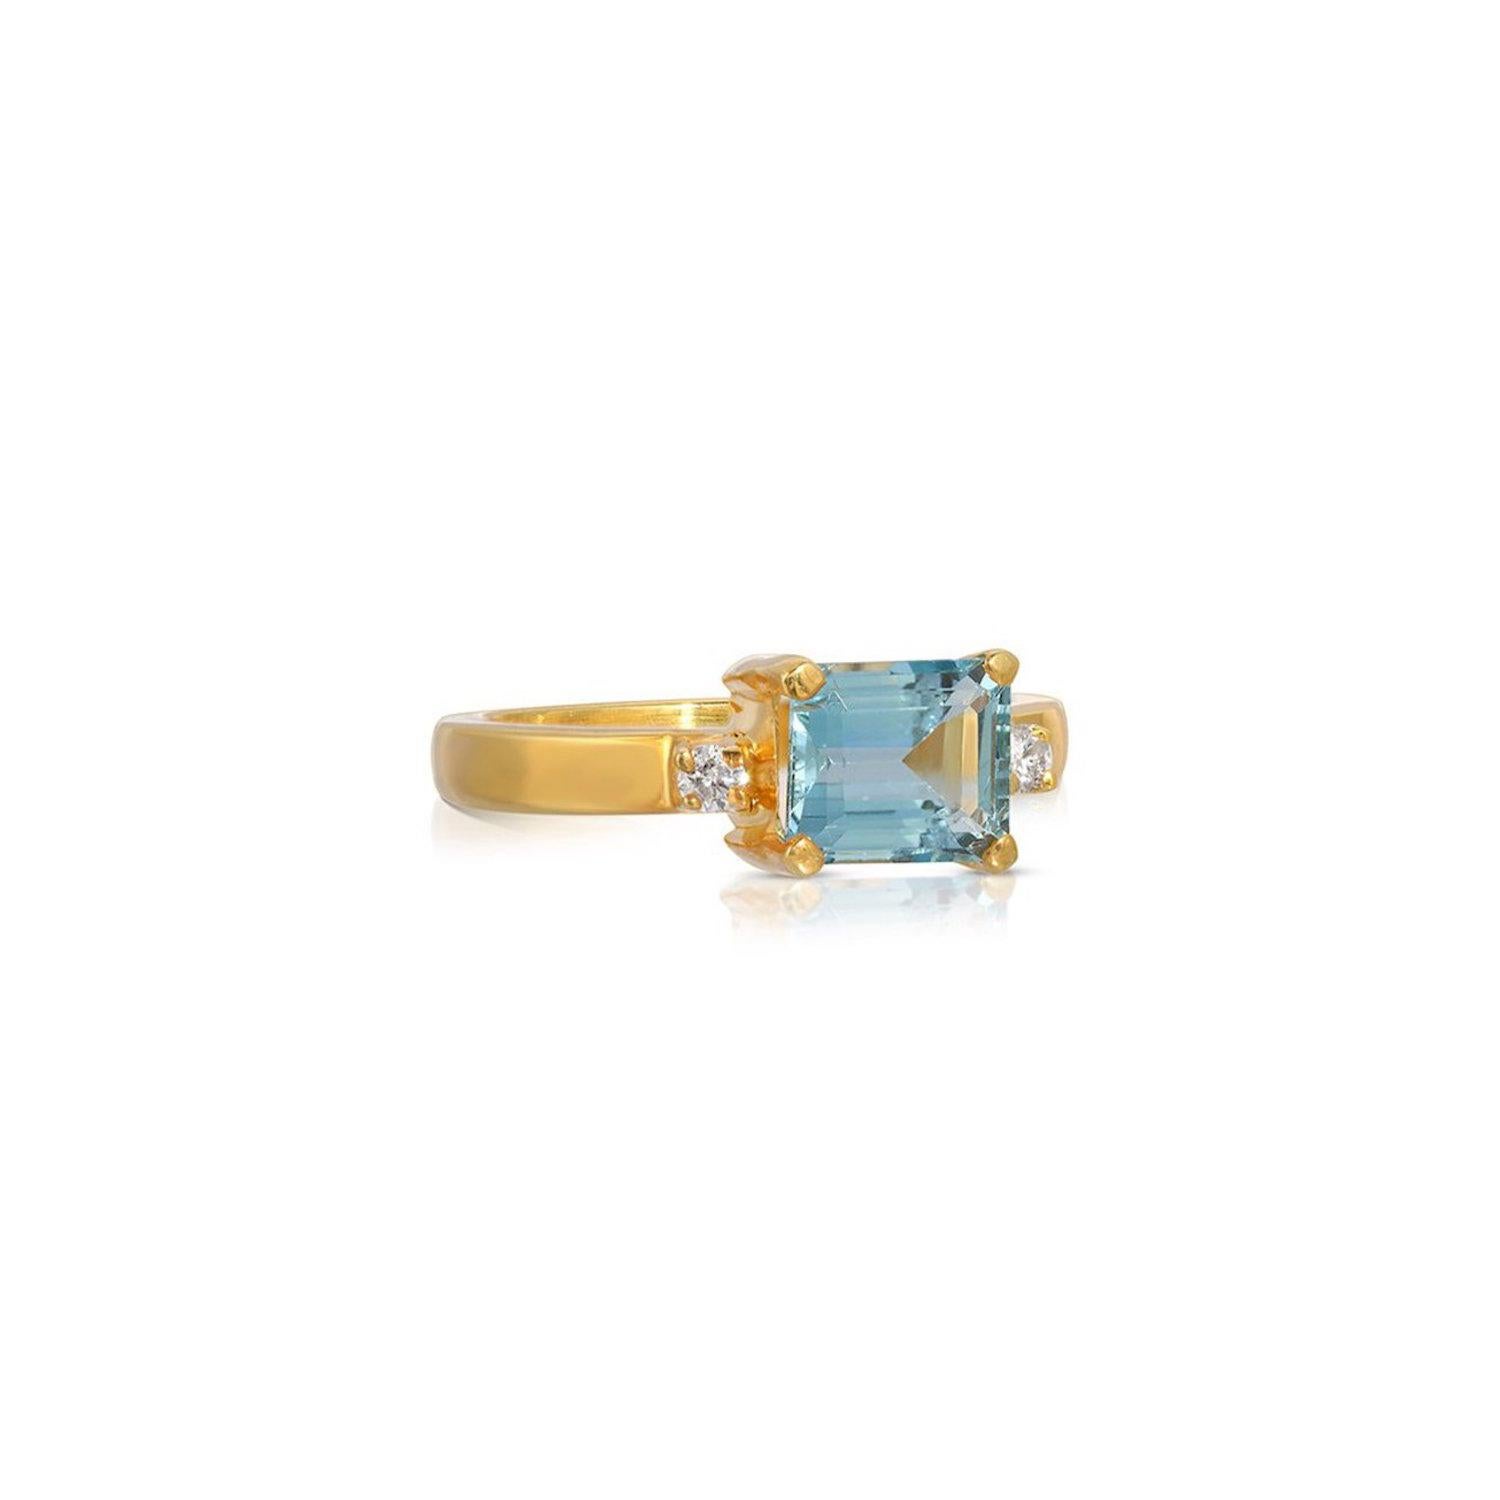 A perfect ring of contemporary design with a beautiful duo of gemstones. This ring features a 2.52 Carats emerald cut Aquamarine centered by .06 Carats of sparkling White Diamonds. This gorgeous ring is set in 22 Karat Gold overlay Silver.